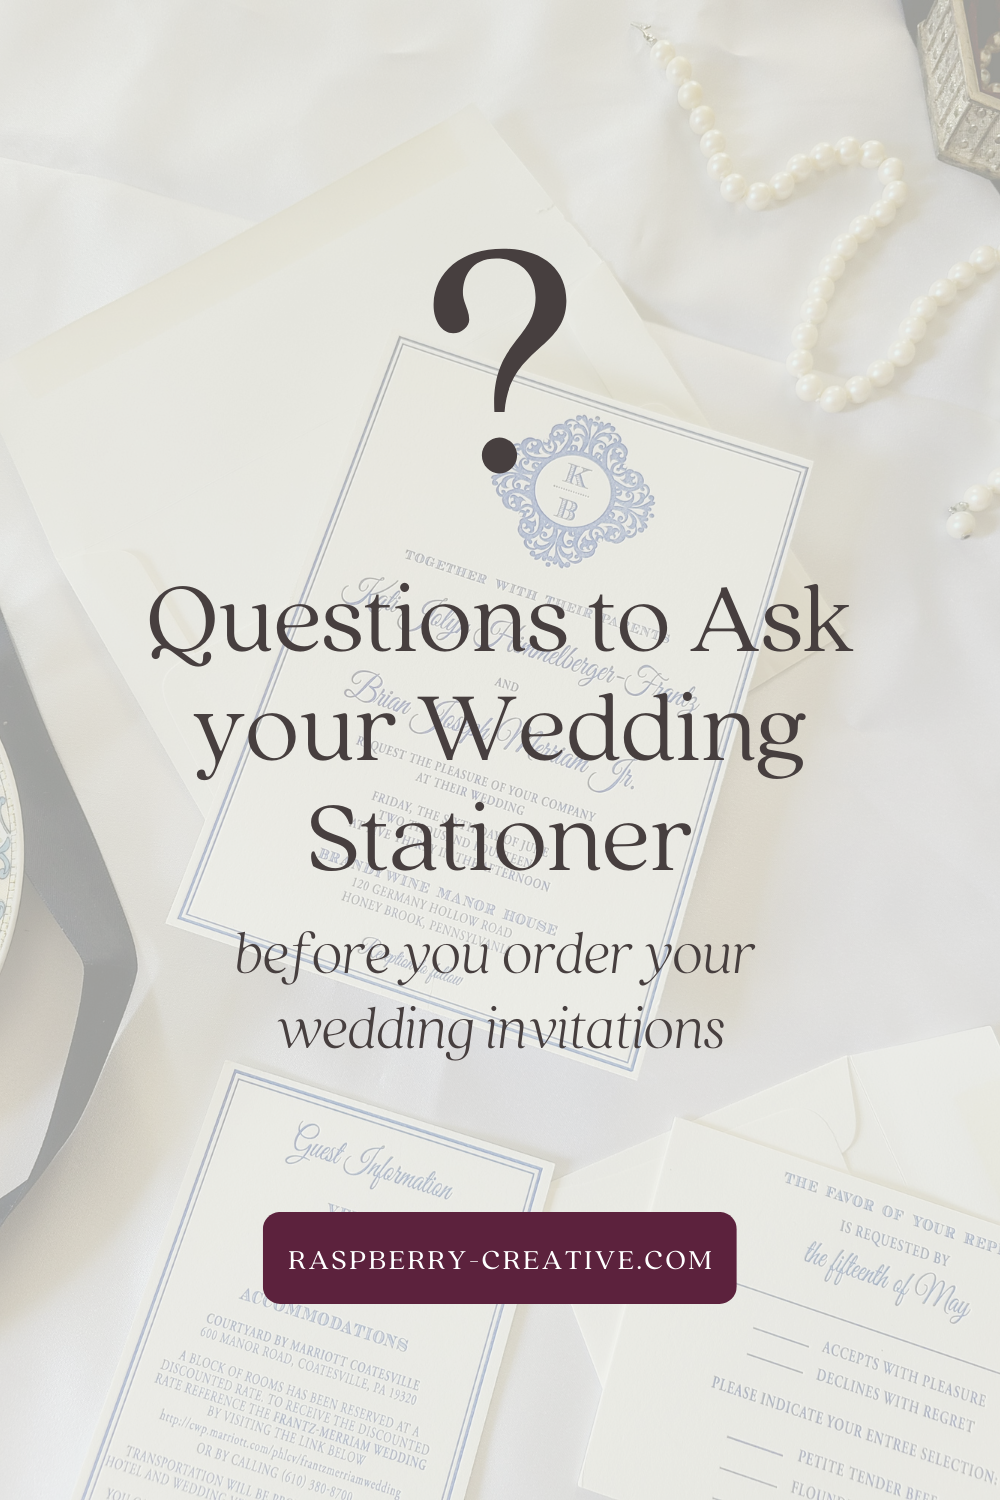 questions to ask your wedding stationer before ordering invitations